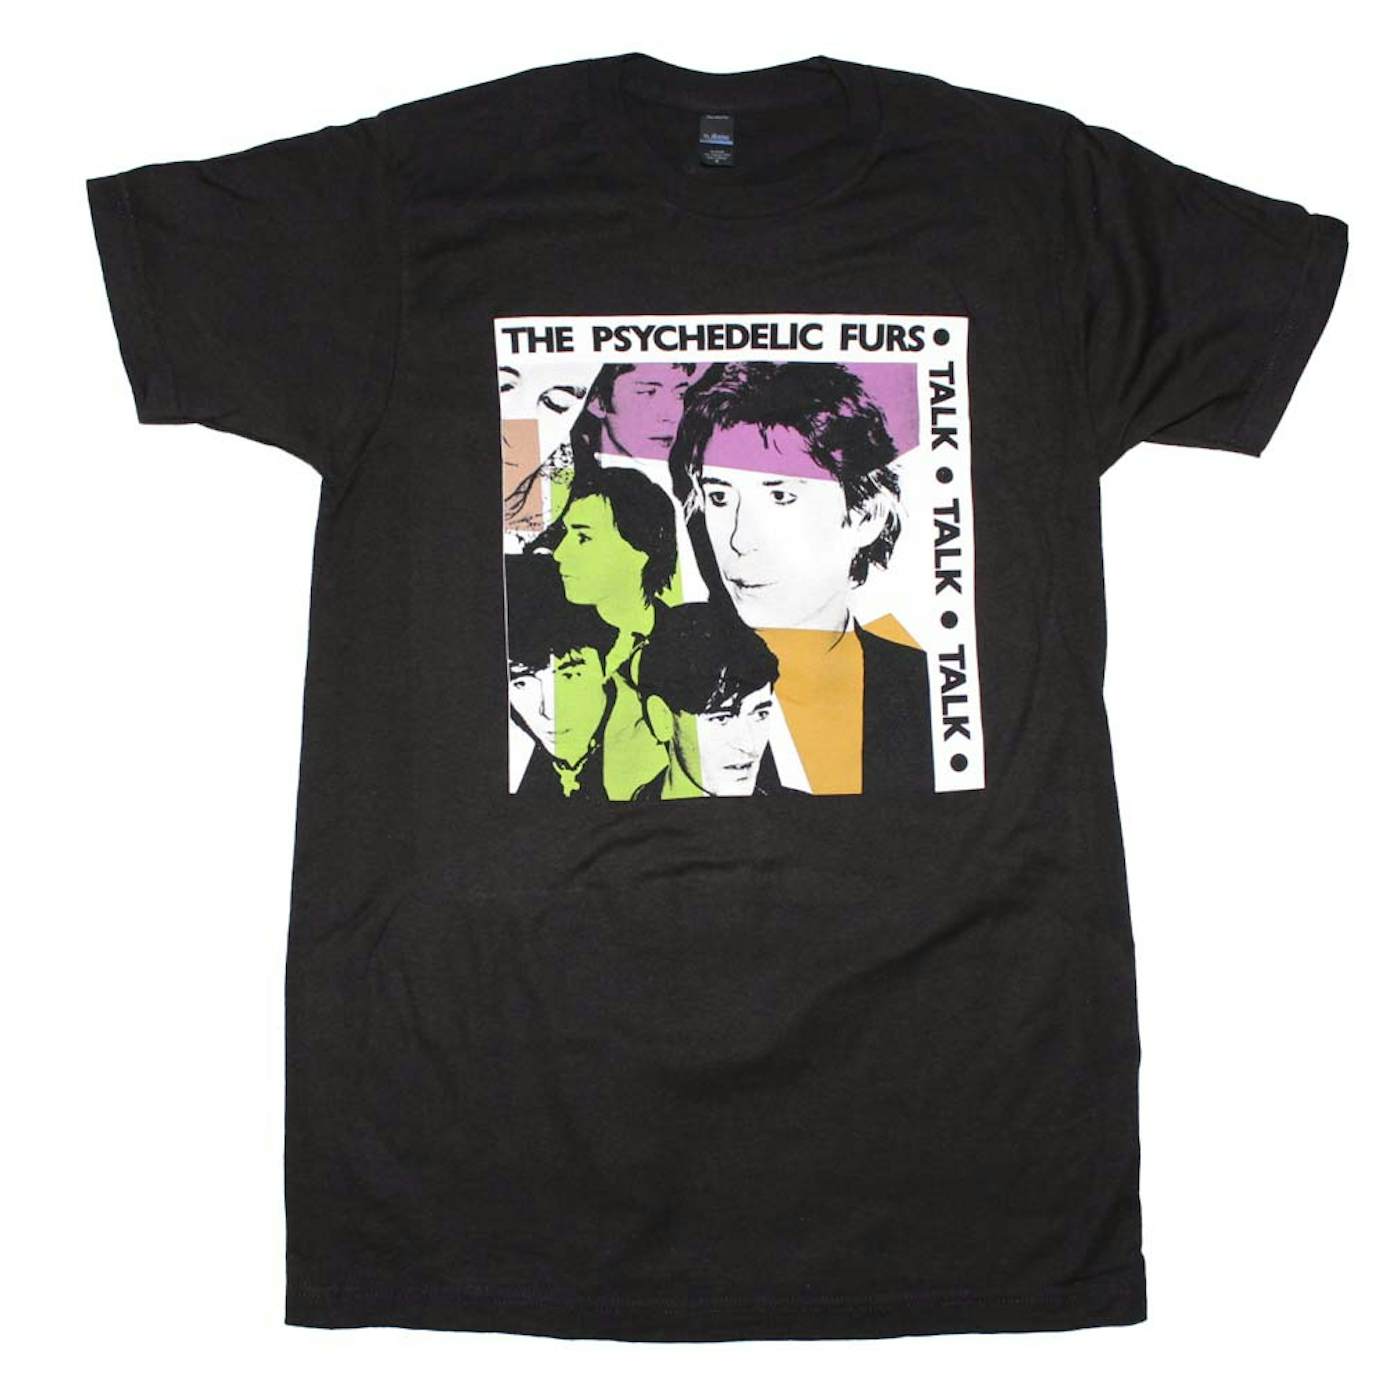 The Psychedelic Furs T Shirt | Psychedelic Furs Talk Talk Talk Fitted T-Shirt